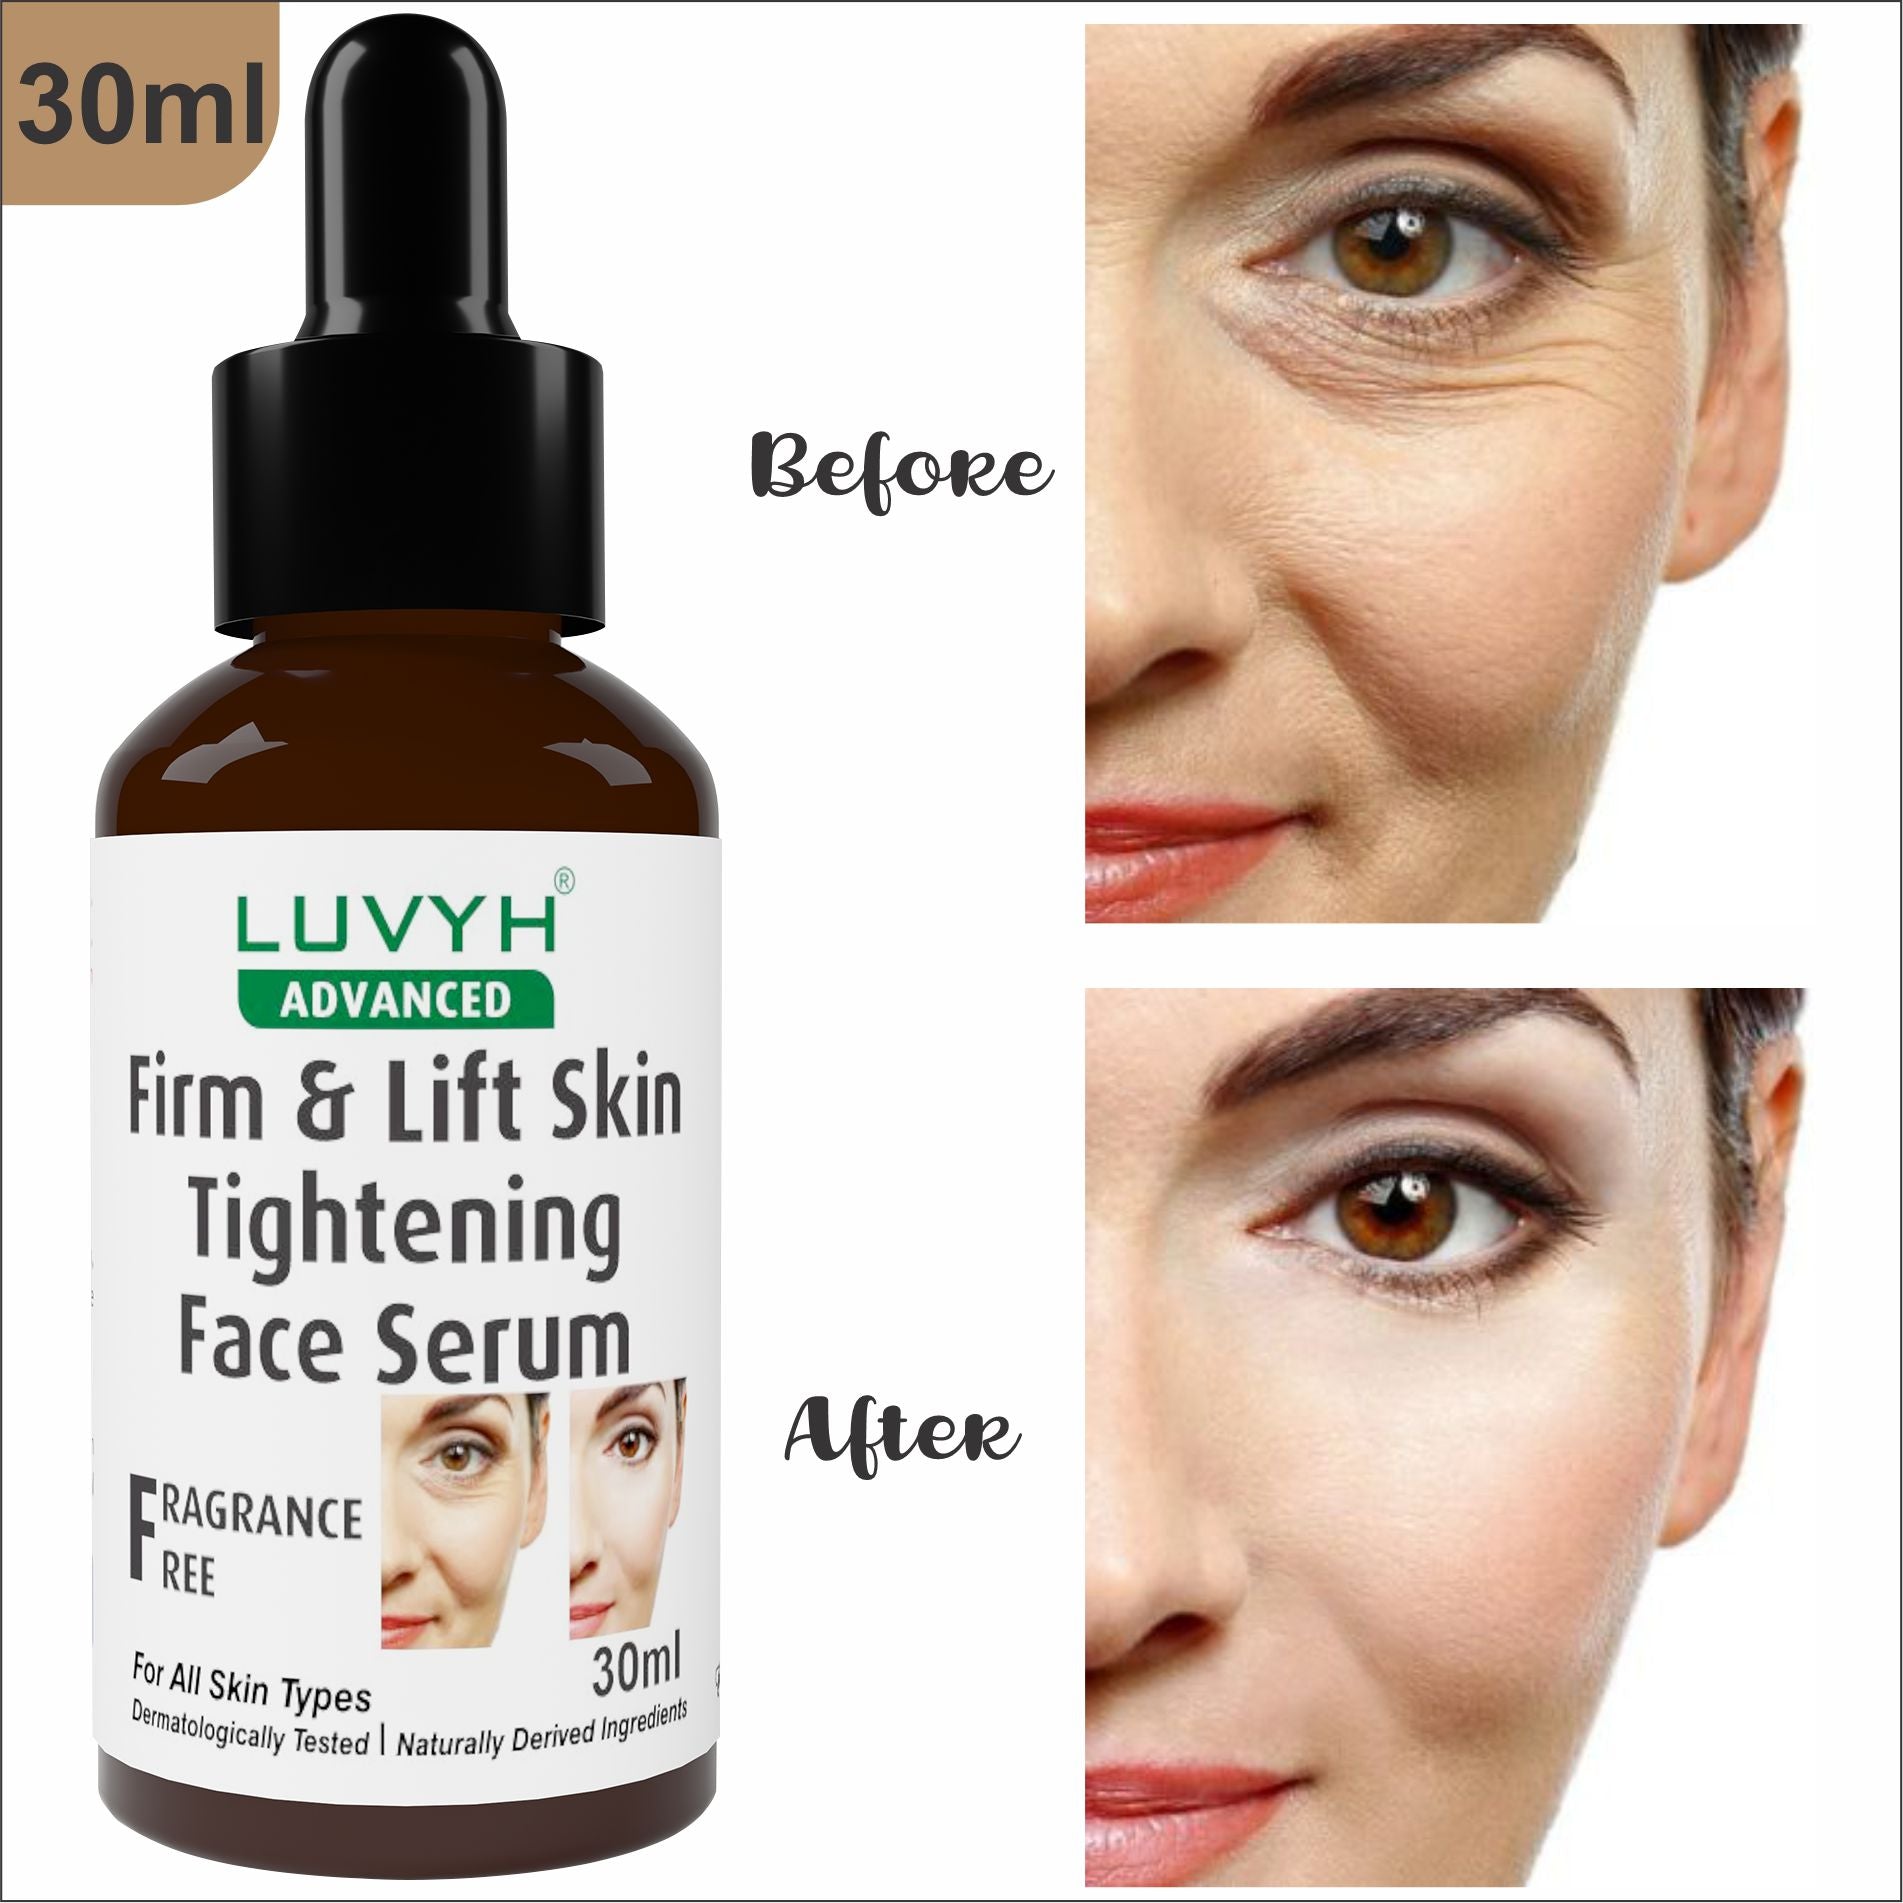 Before and After Results - Firm & Lift Skin Tightening Face Serum